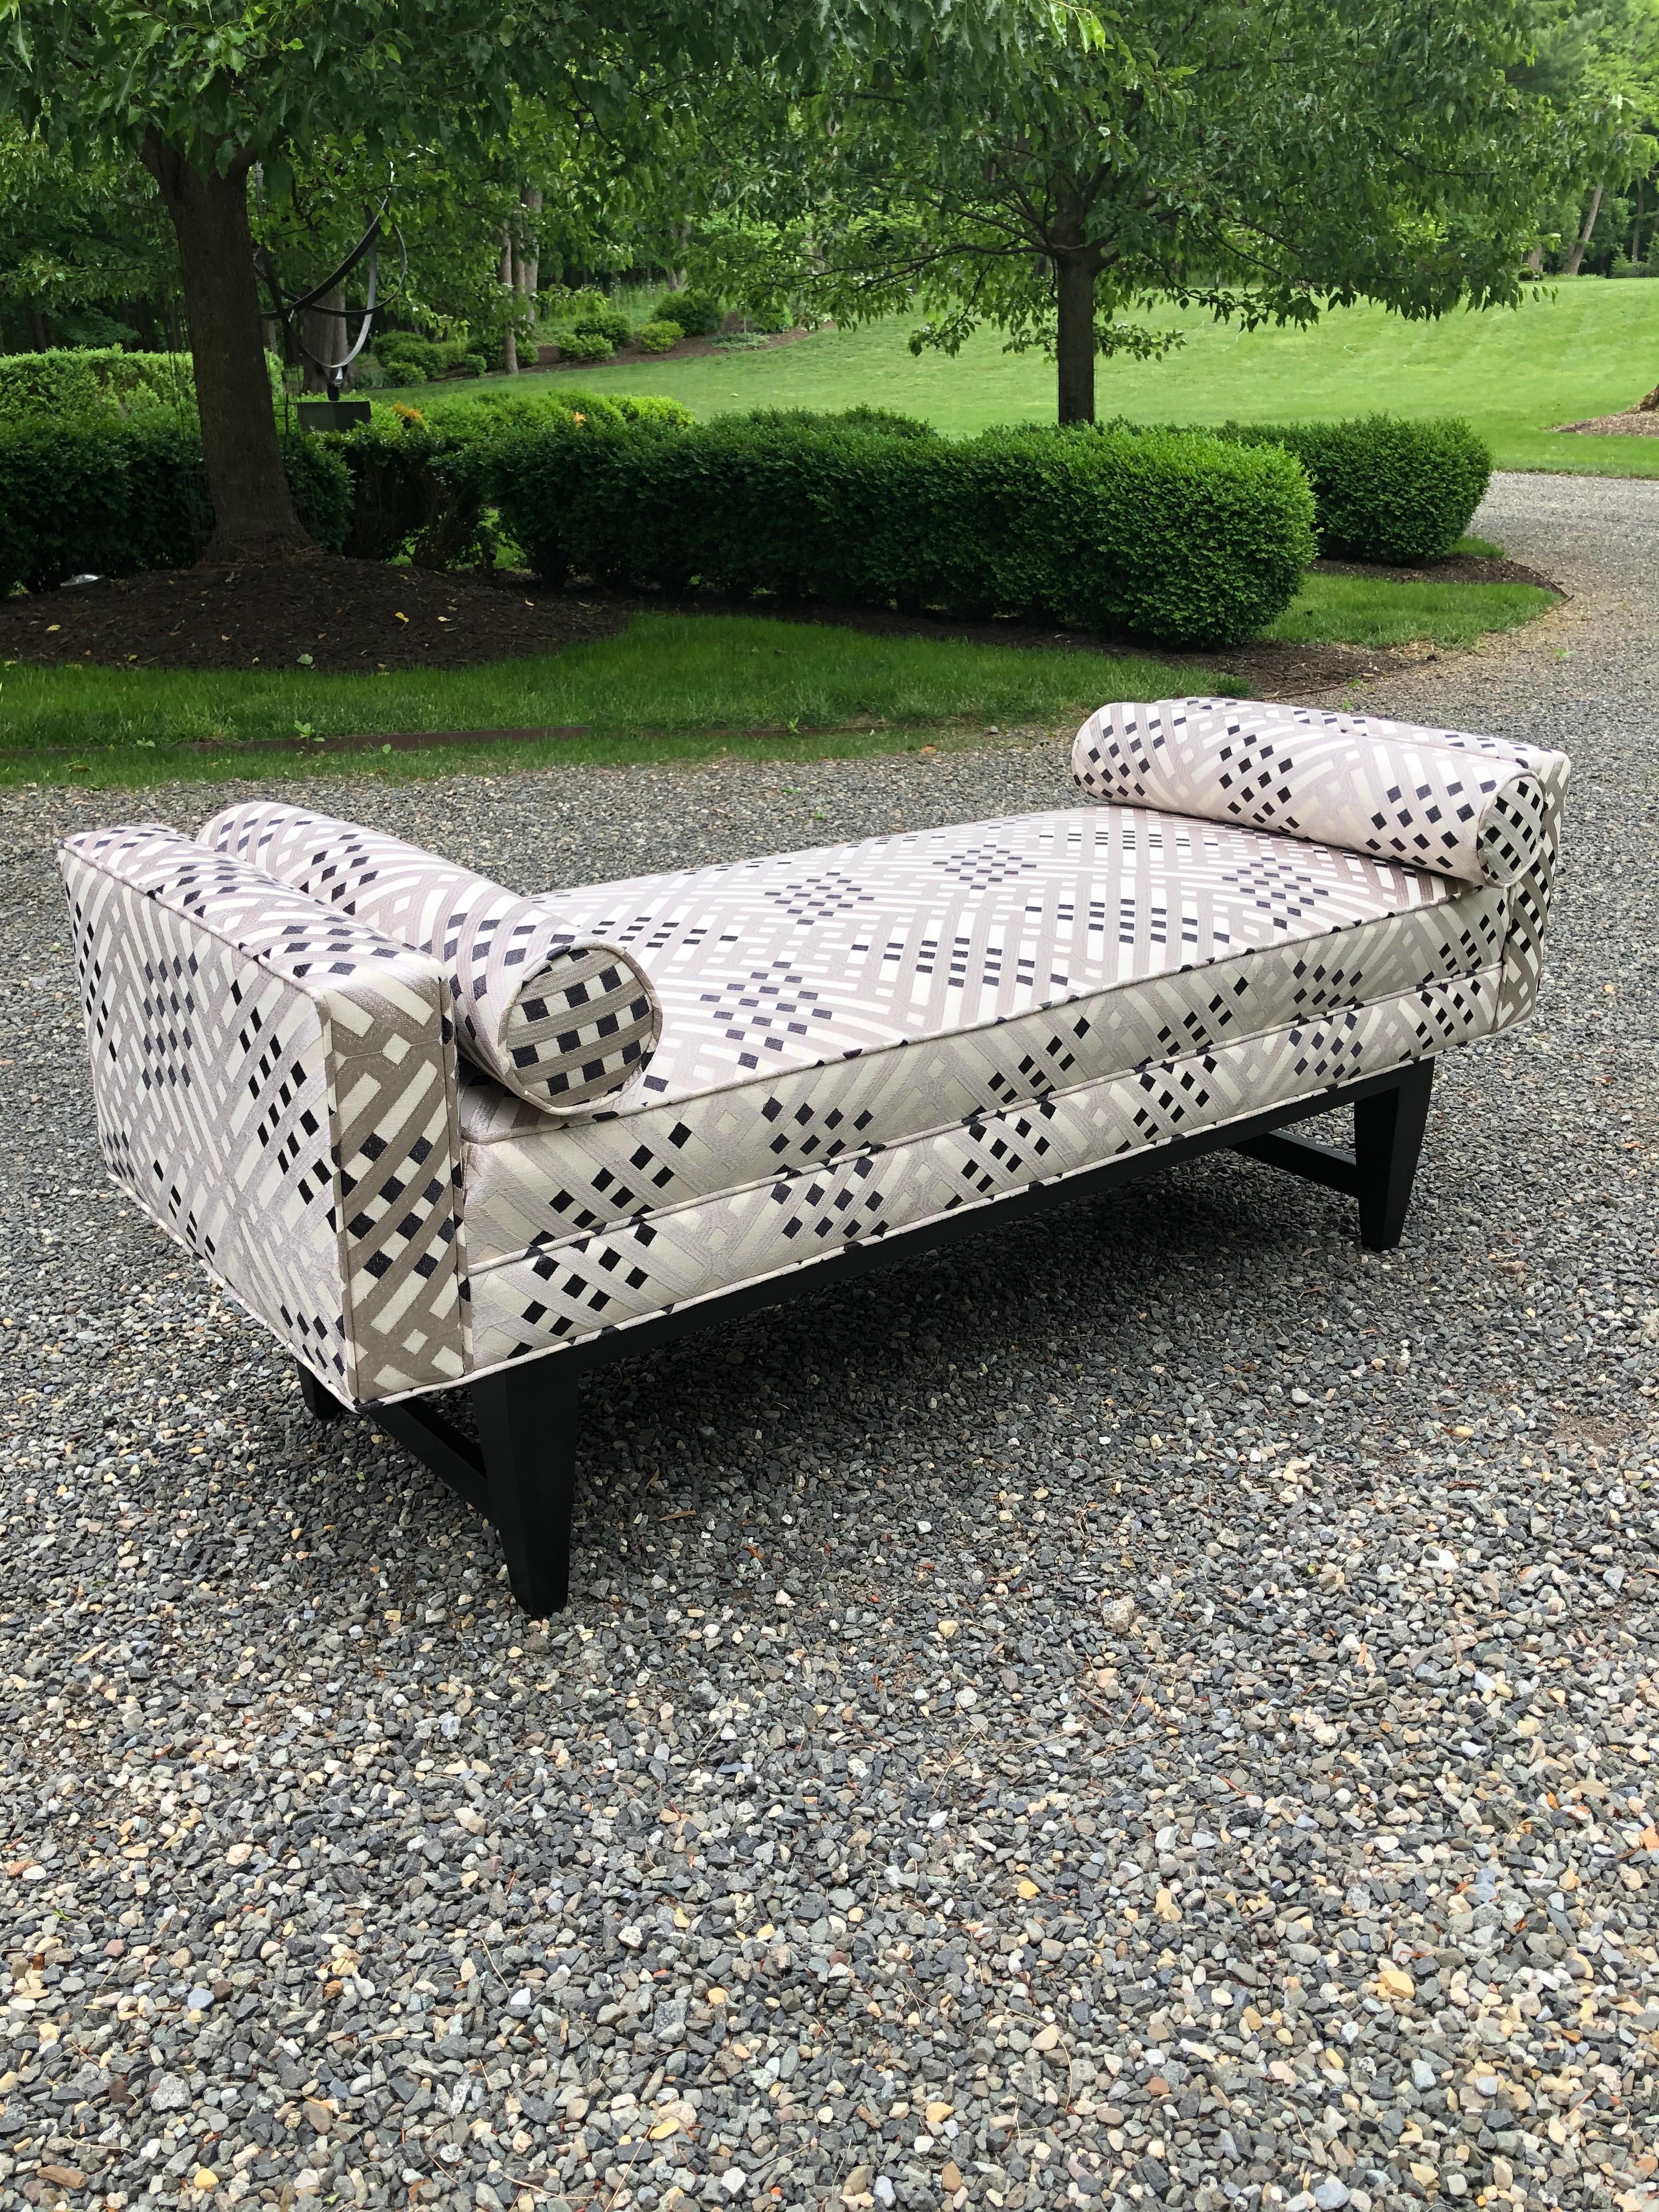 Custom settee bench in new colefax and fowler upholstery. Upholstery is a silvery grey, white and black lattice. Bench has straight arms and ebonized legs giving it a clean, elegant look. Rolled accent cushions.